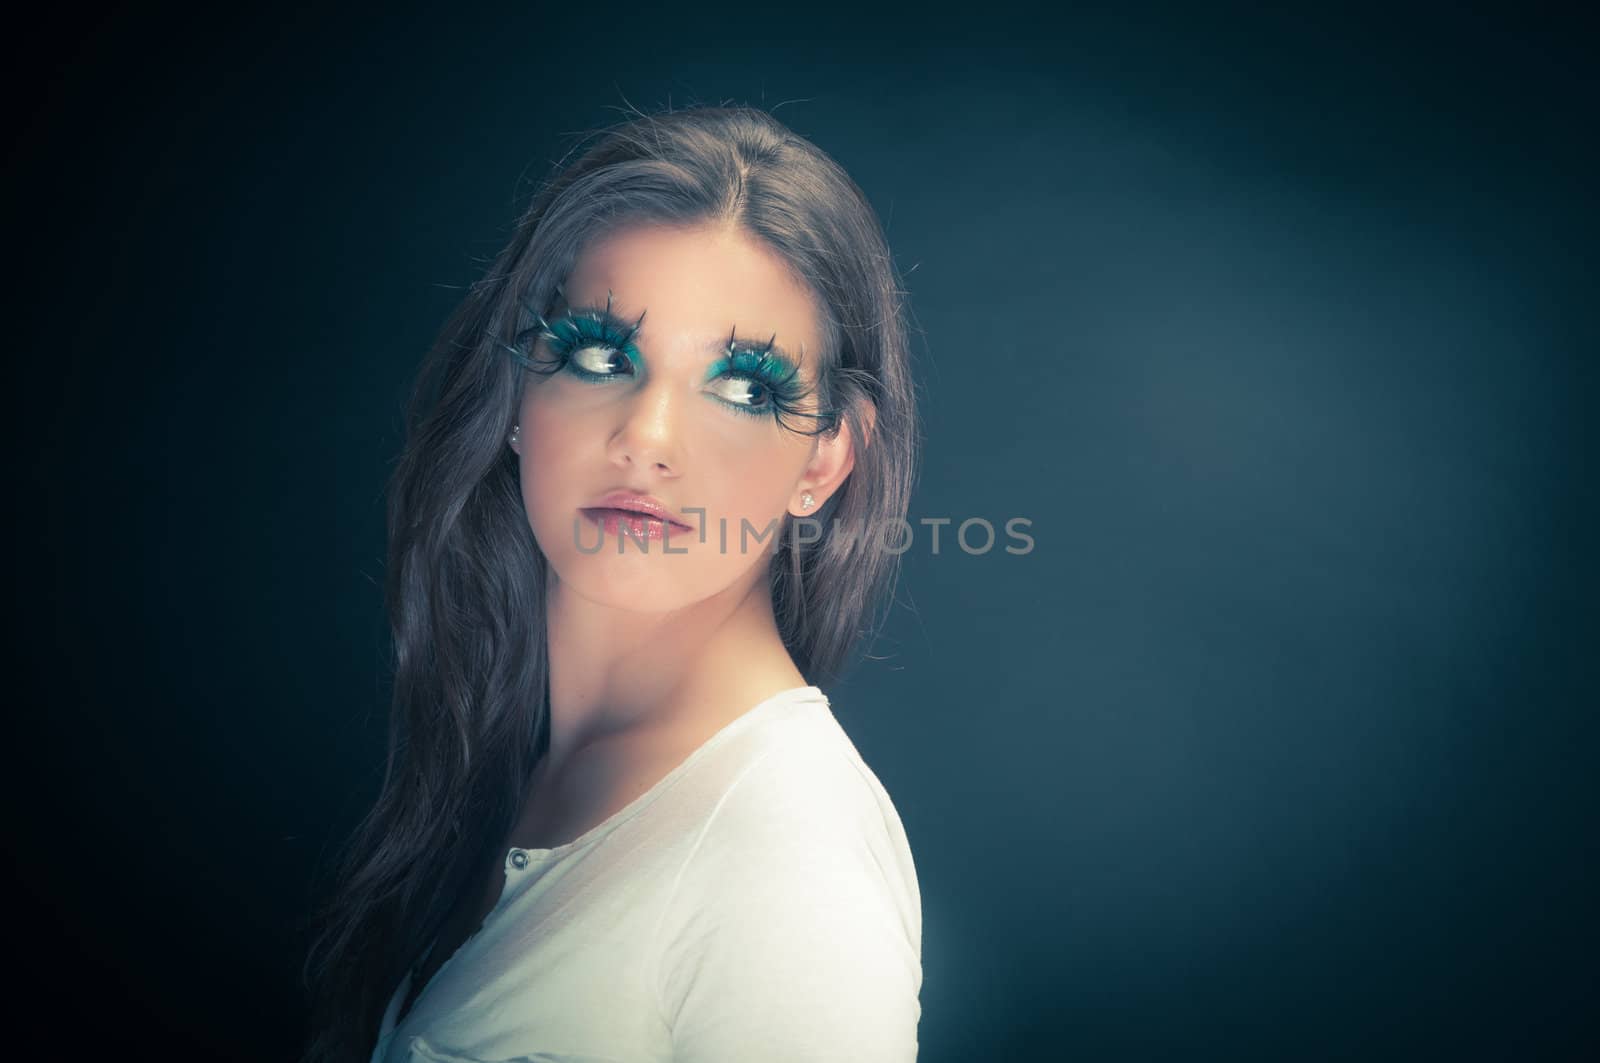 Young woman in the studio with extreme makeup against dark background